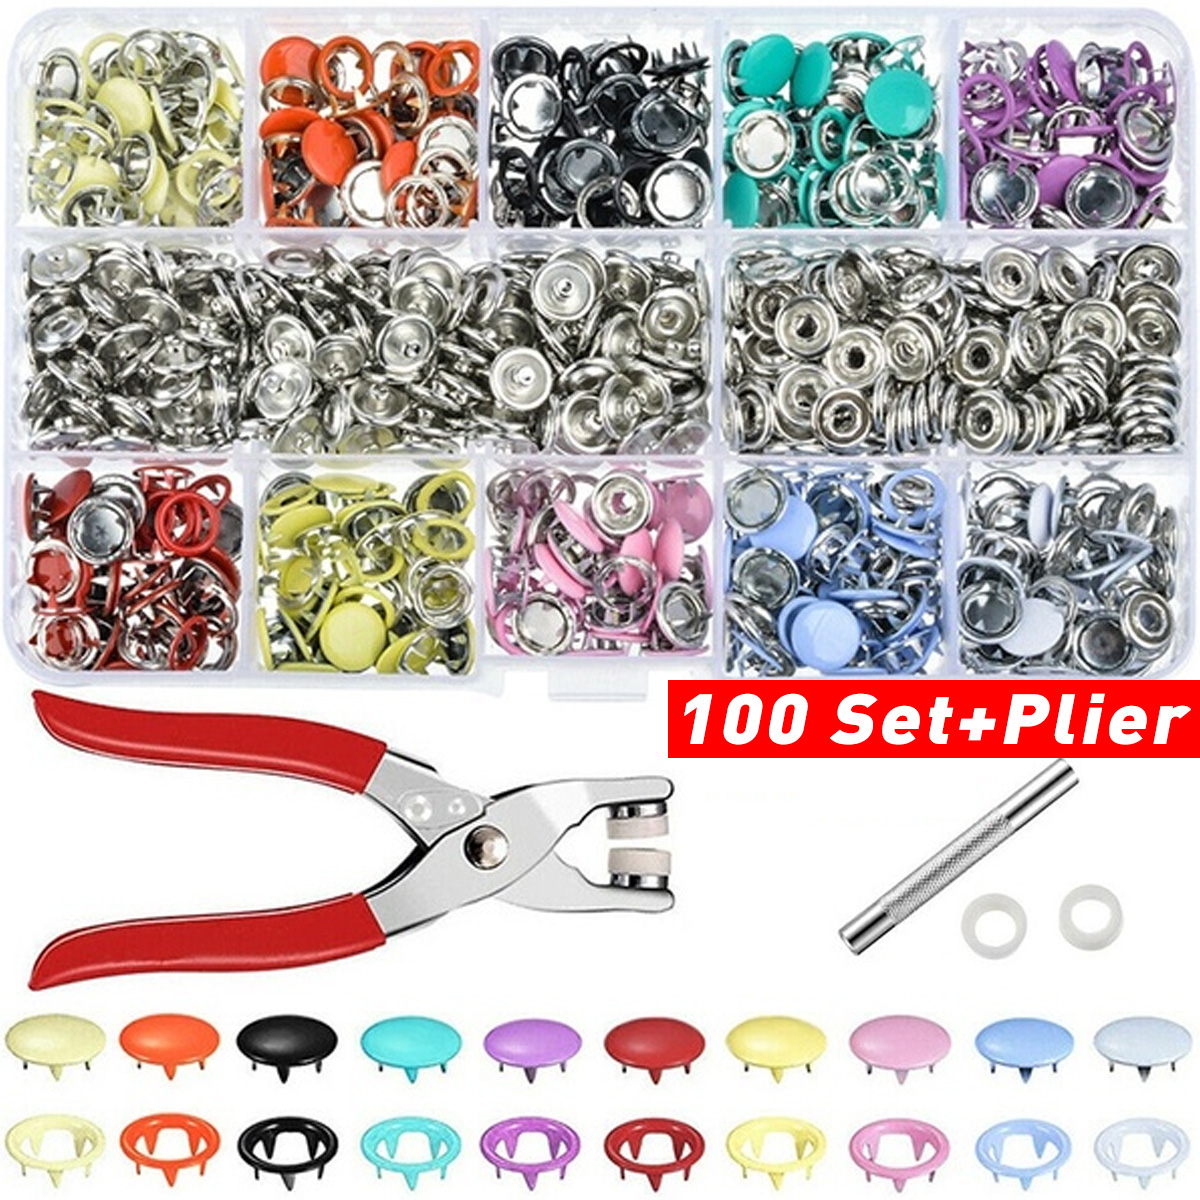 100200-Sets-DIY-Press-Studs-Tools-Kit-Assorted-Colors-Snap-Metal-Sewing-Buttons-1618875-3